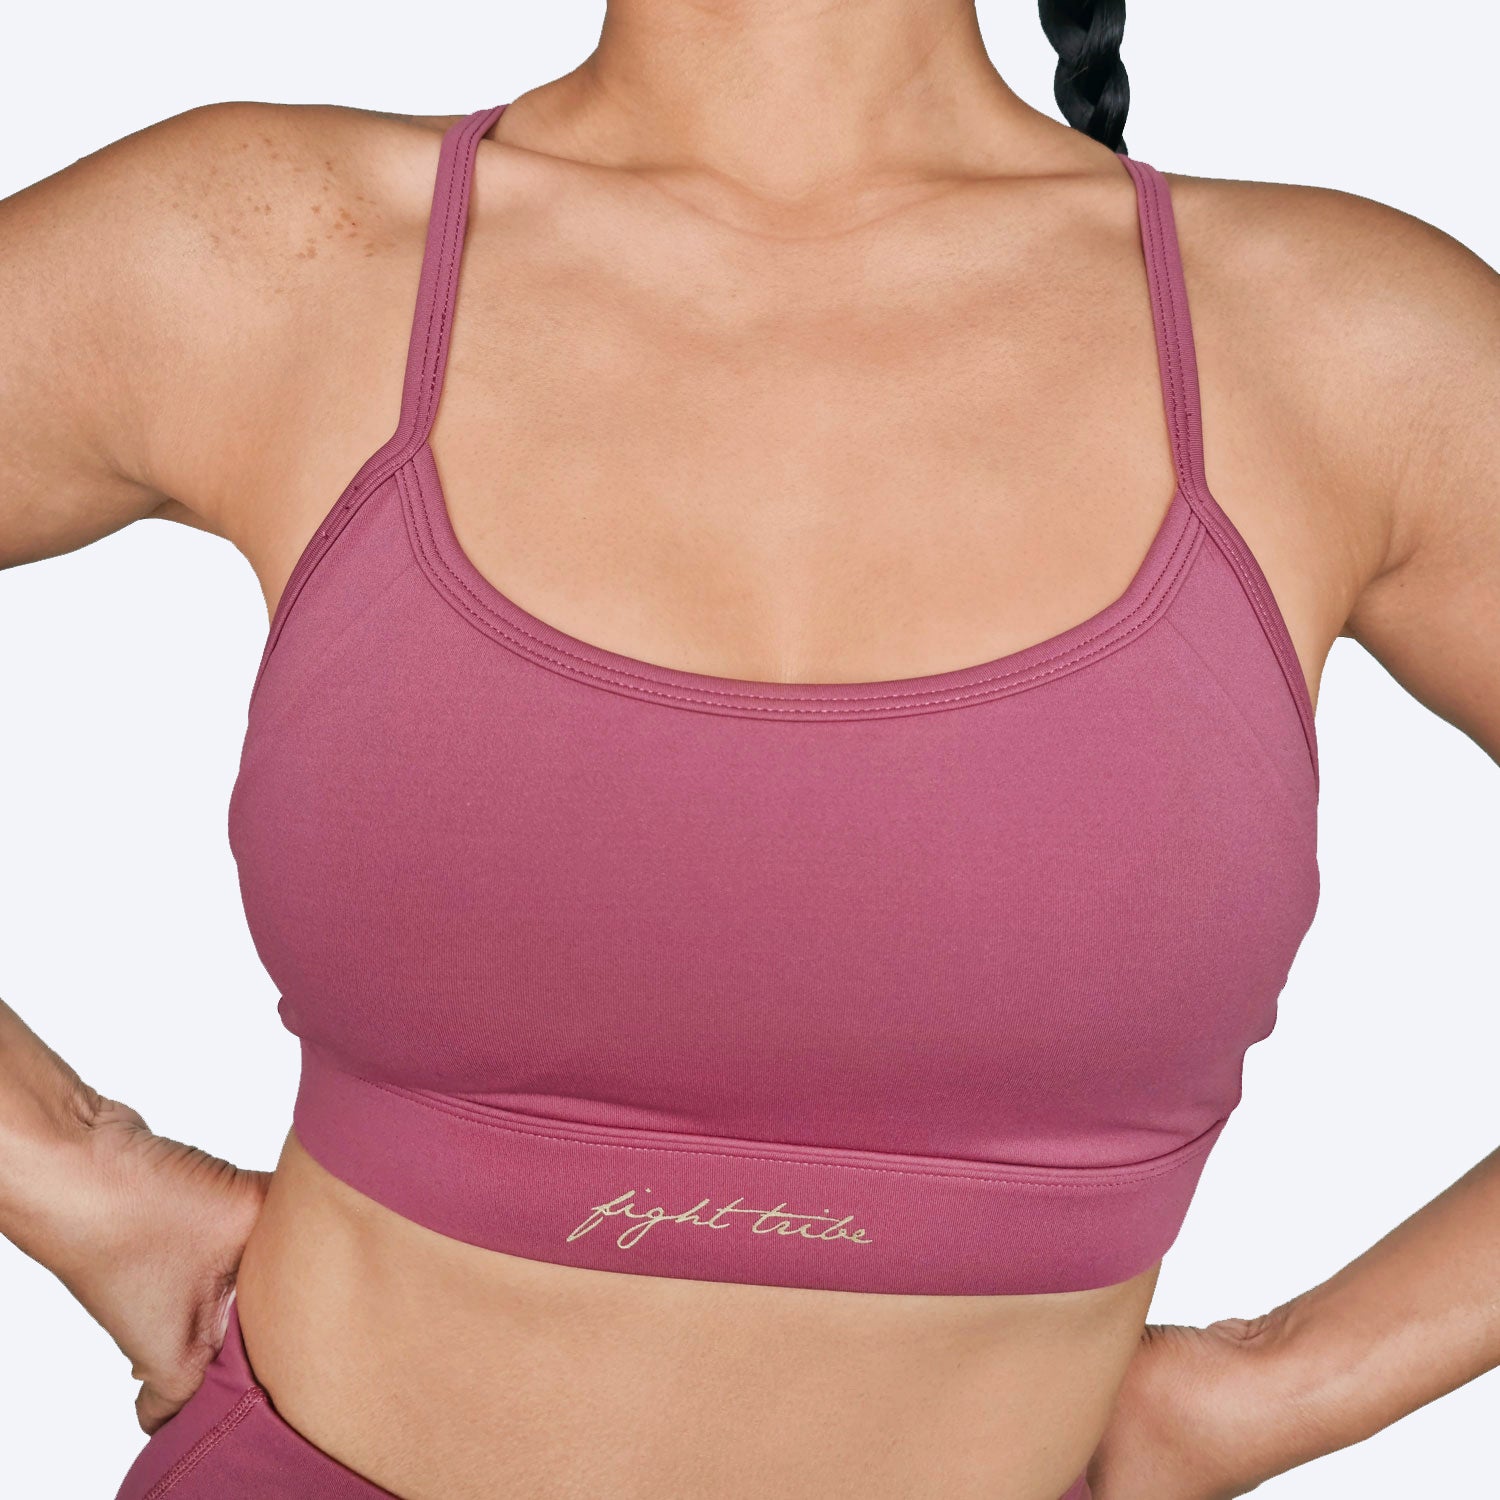 Eris Sports Bra (Berry) - sports bra for kickboxing, muay thai, boxing,  mixed martial arts and other combat sports